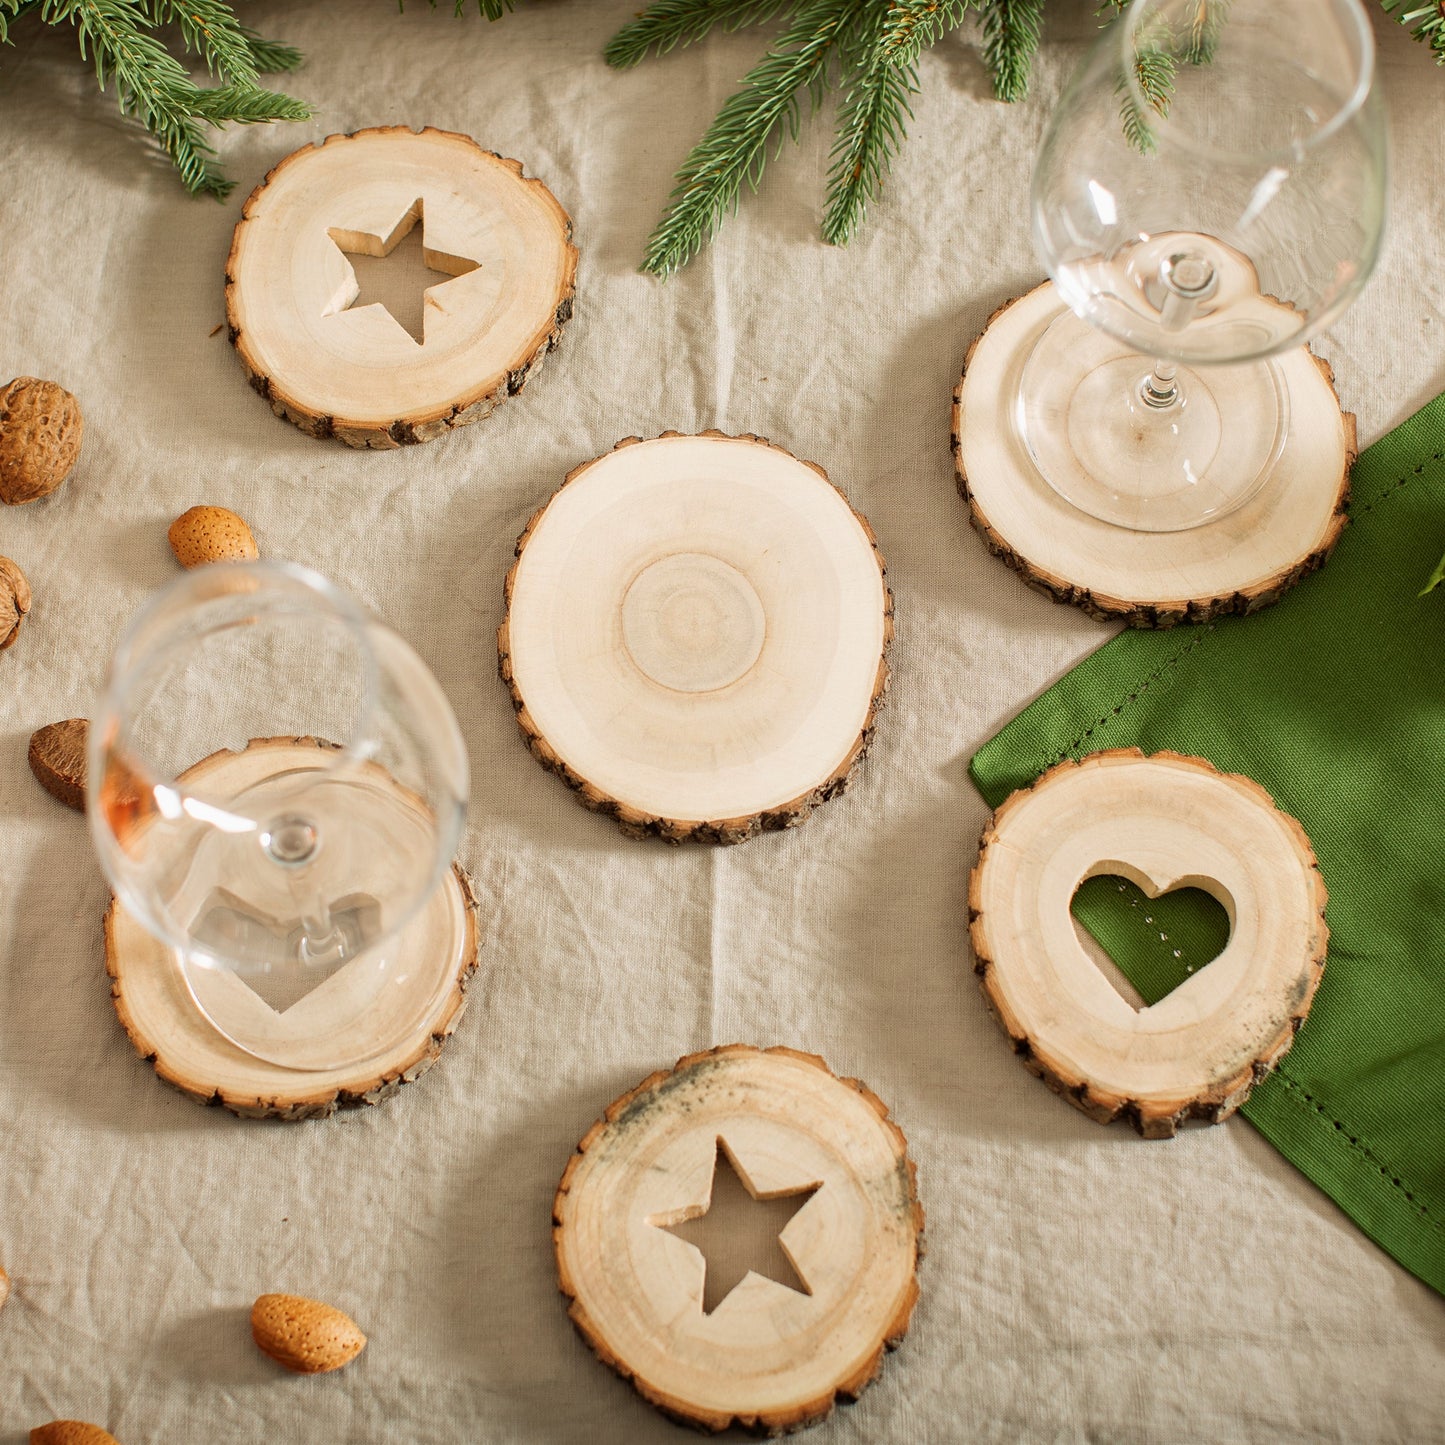 Wooden Cut Out Star Coasters Set 4